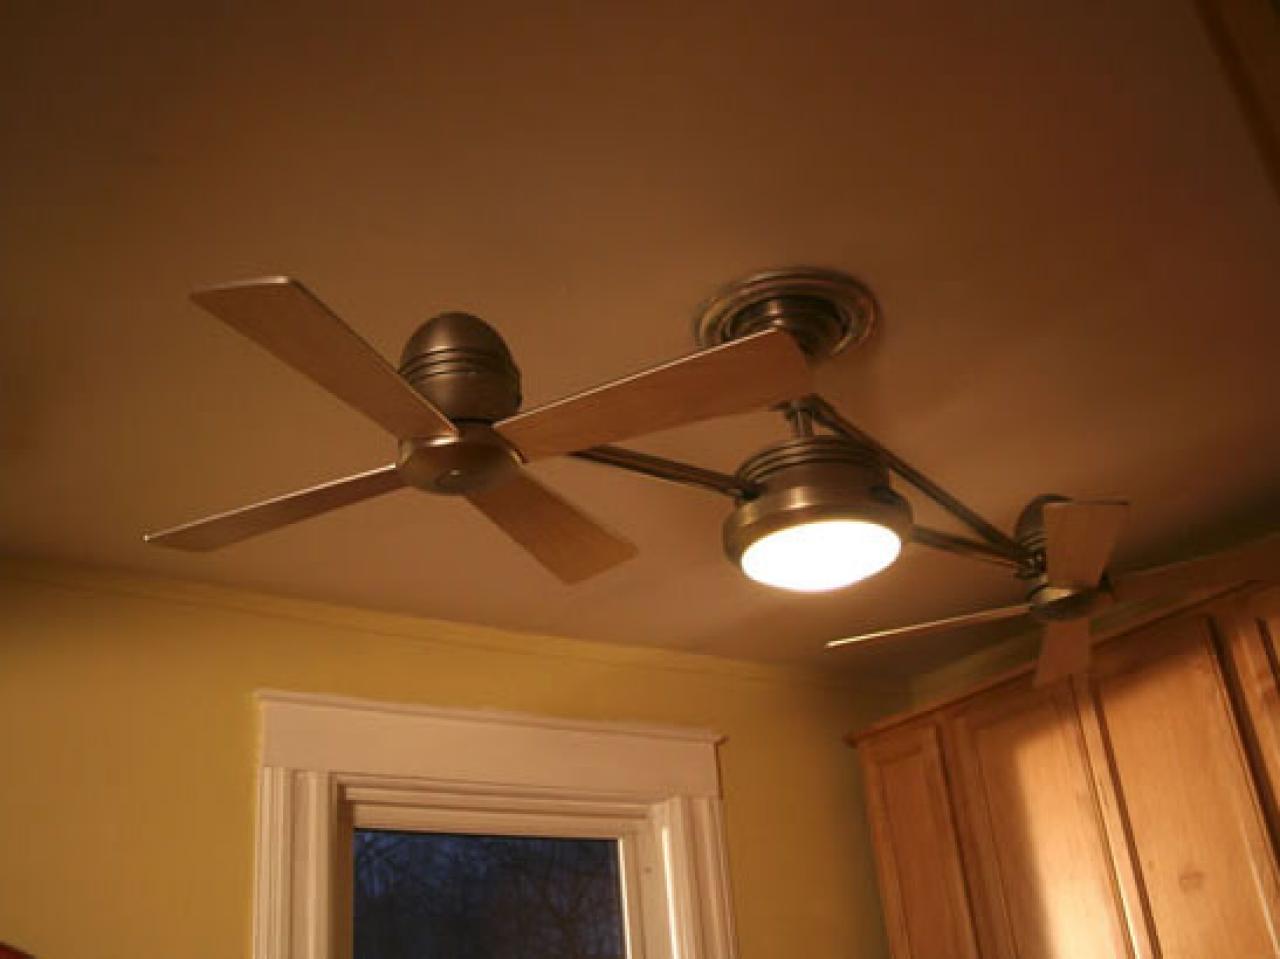 Replace a Ceiling Fan in Kitchen | HGTV